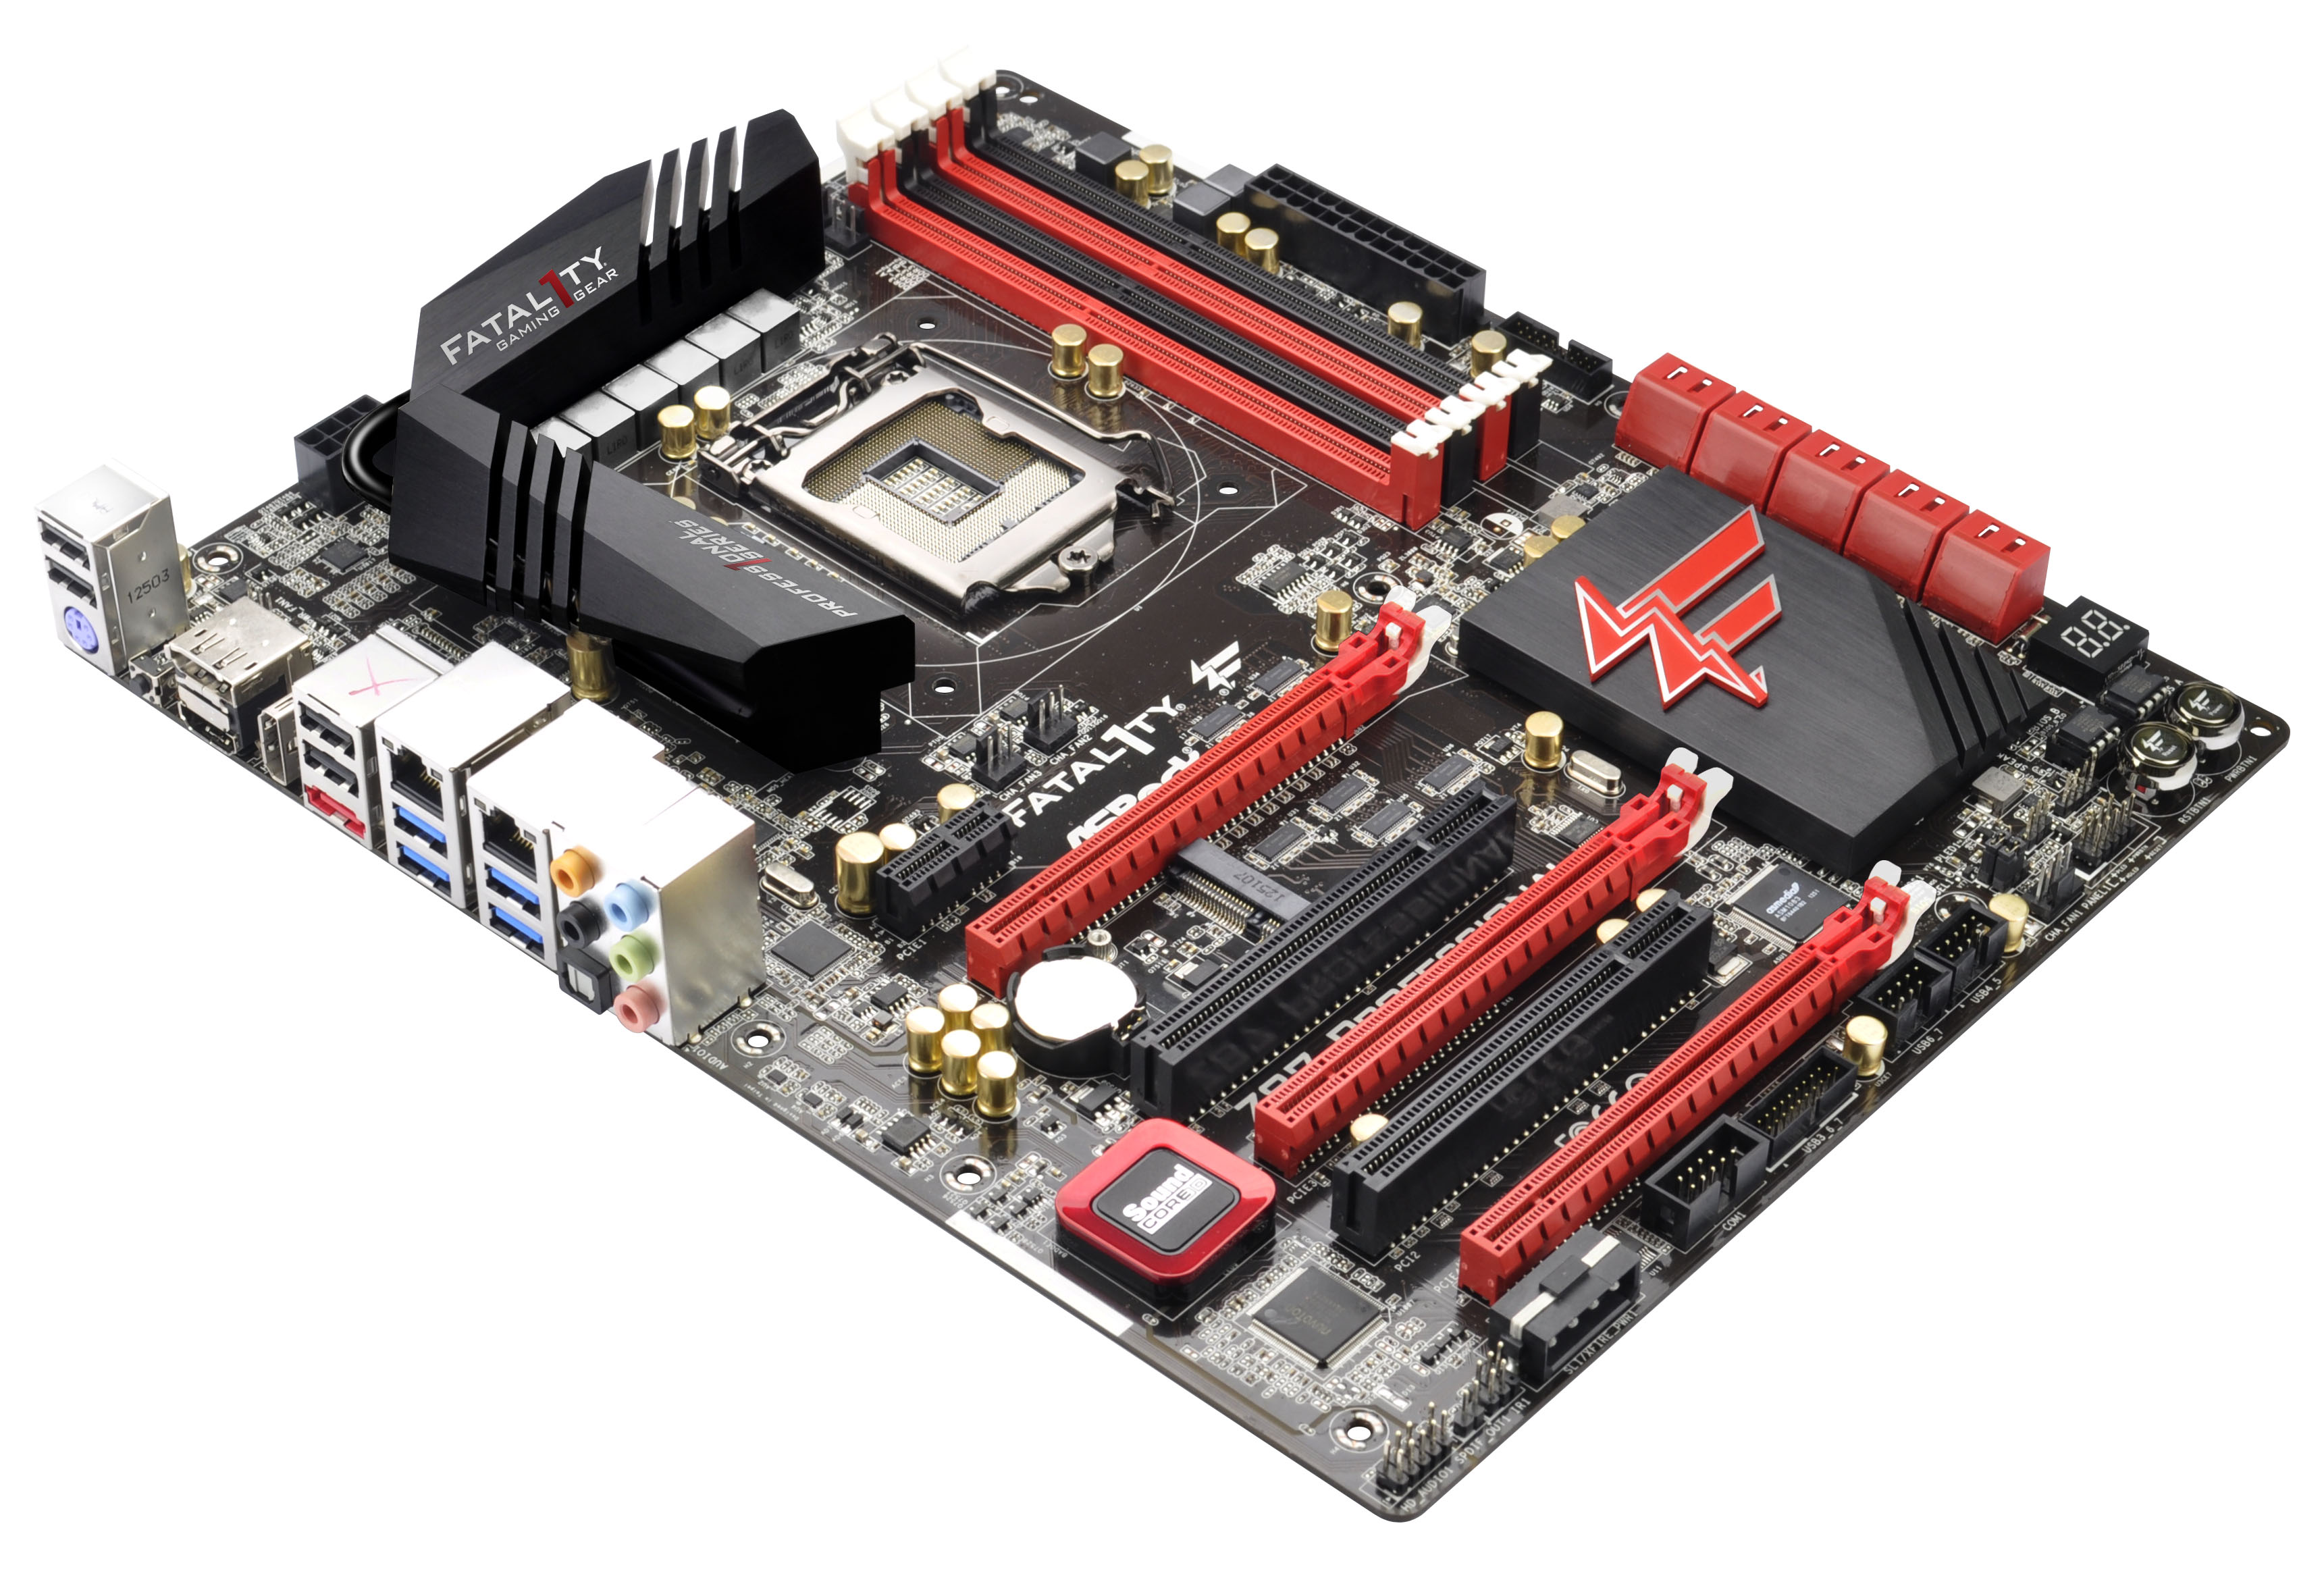 ASRock Z87 - Haswell Z87 Motherboard Preview: 50+ Motherboards 